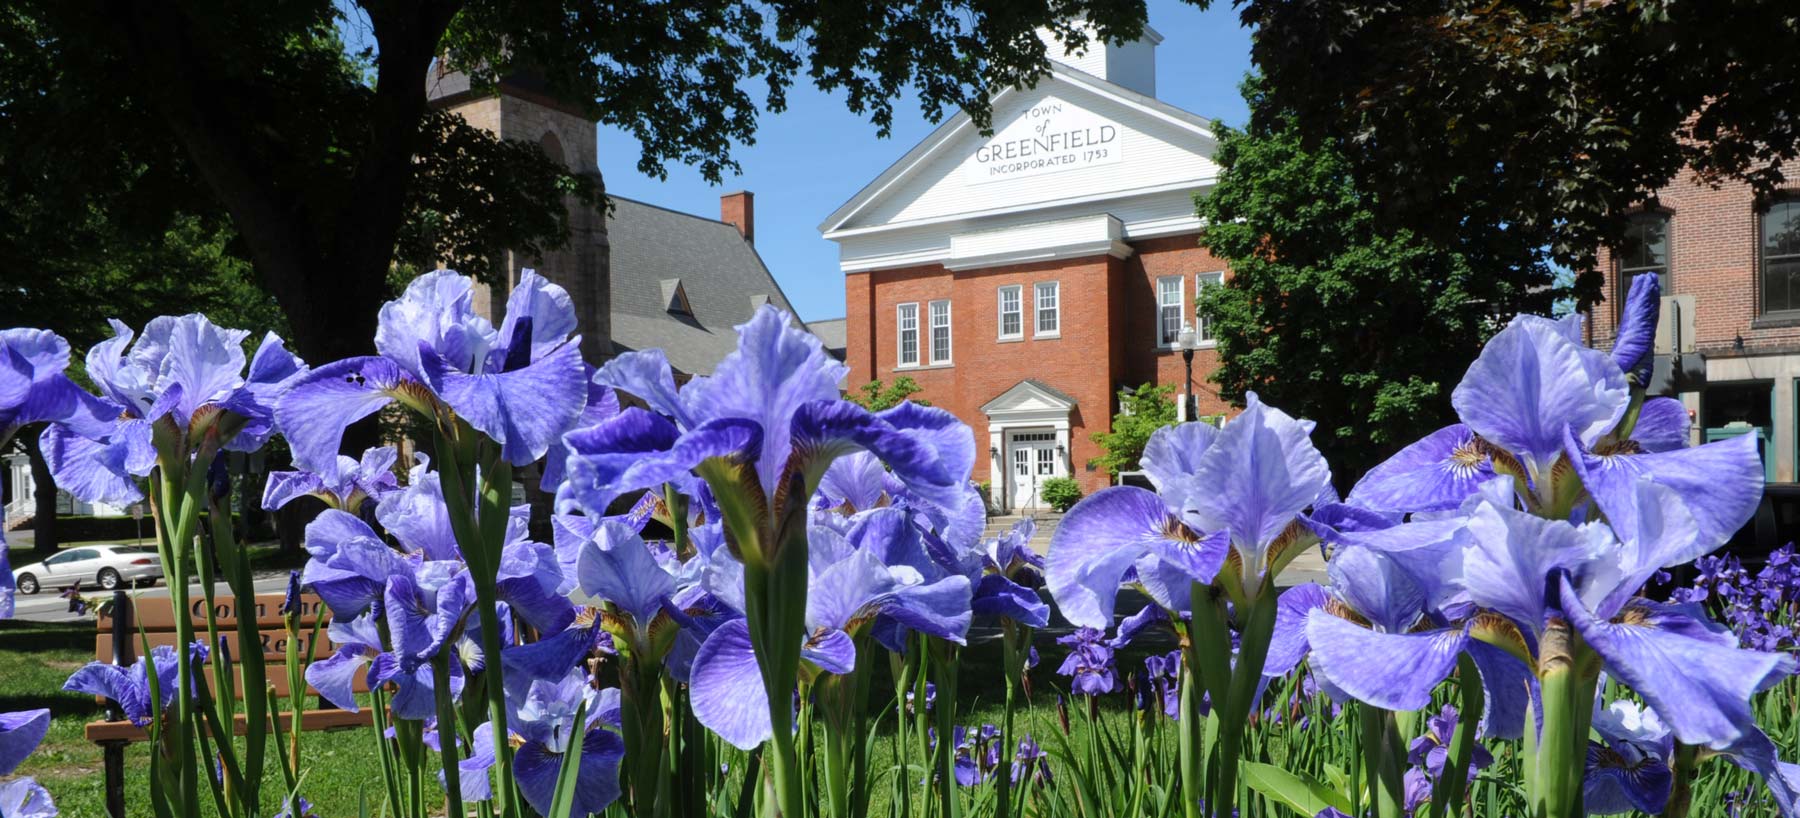 Irises in bloom on the Greenfield Common. Photo by Paul Franz.